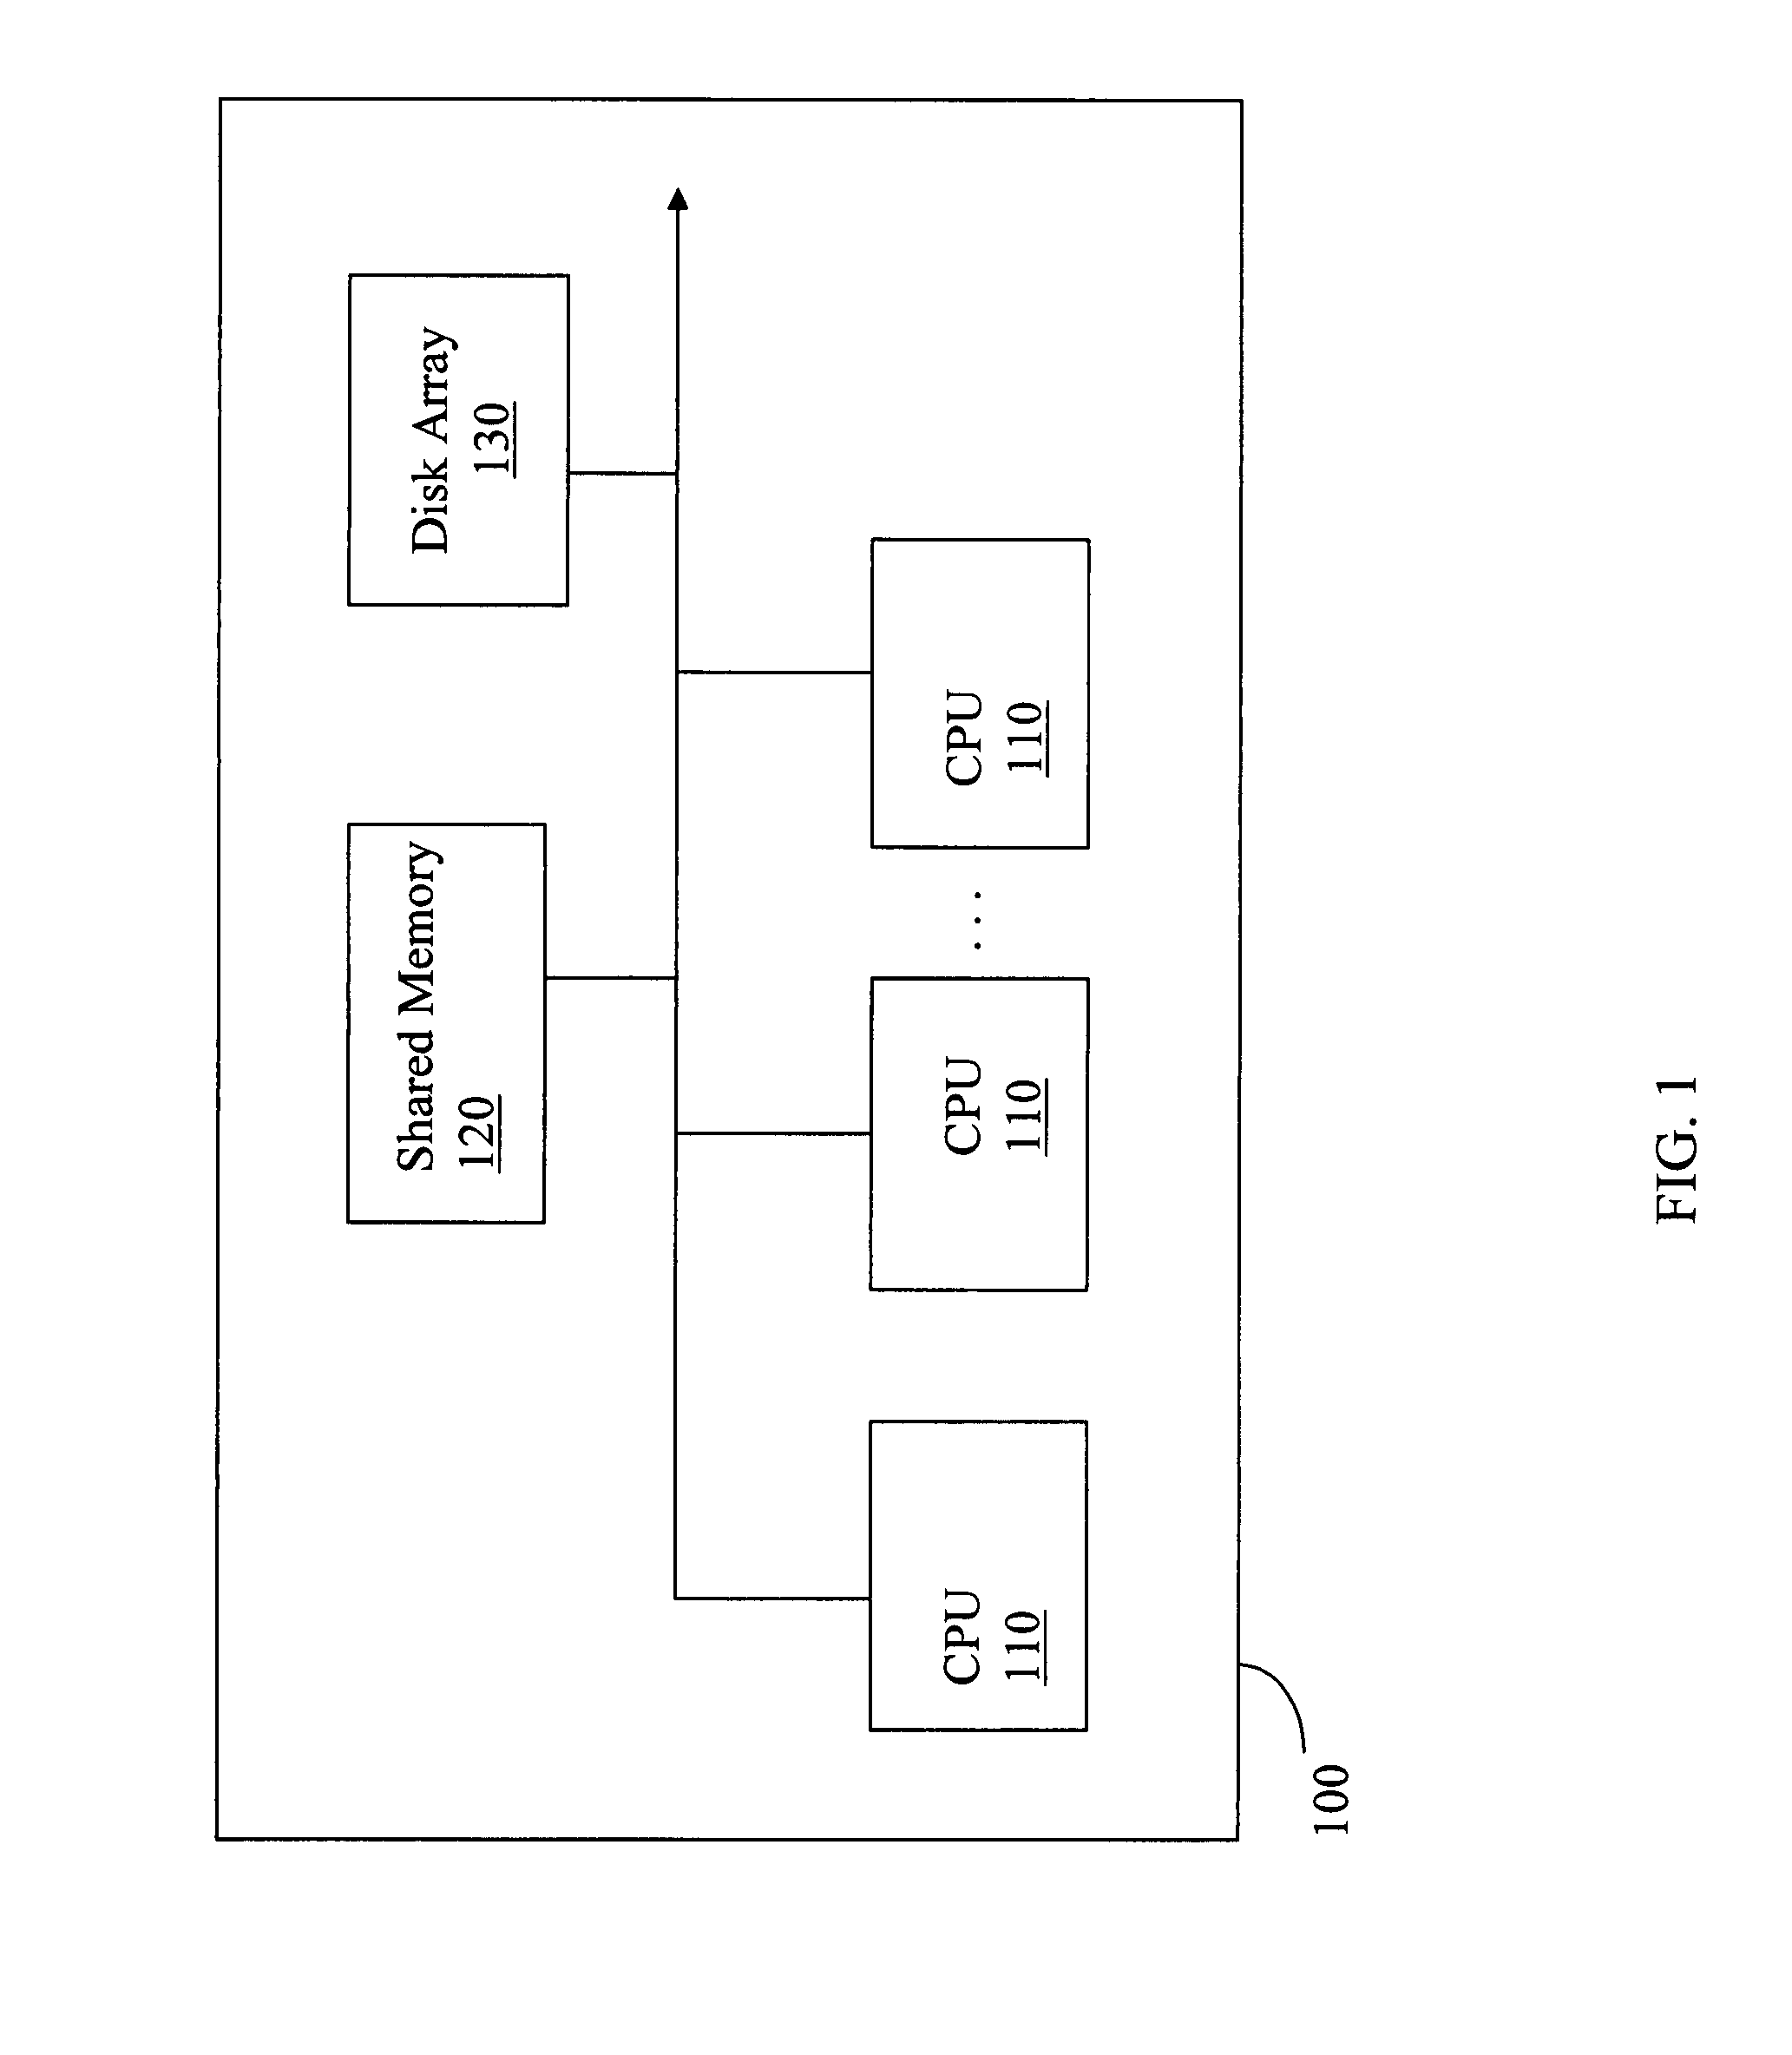 Method for promotion and demotion between system calls and fast kernel calls